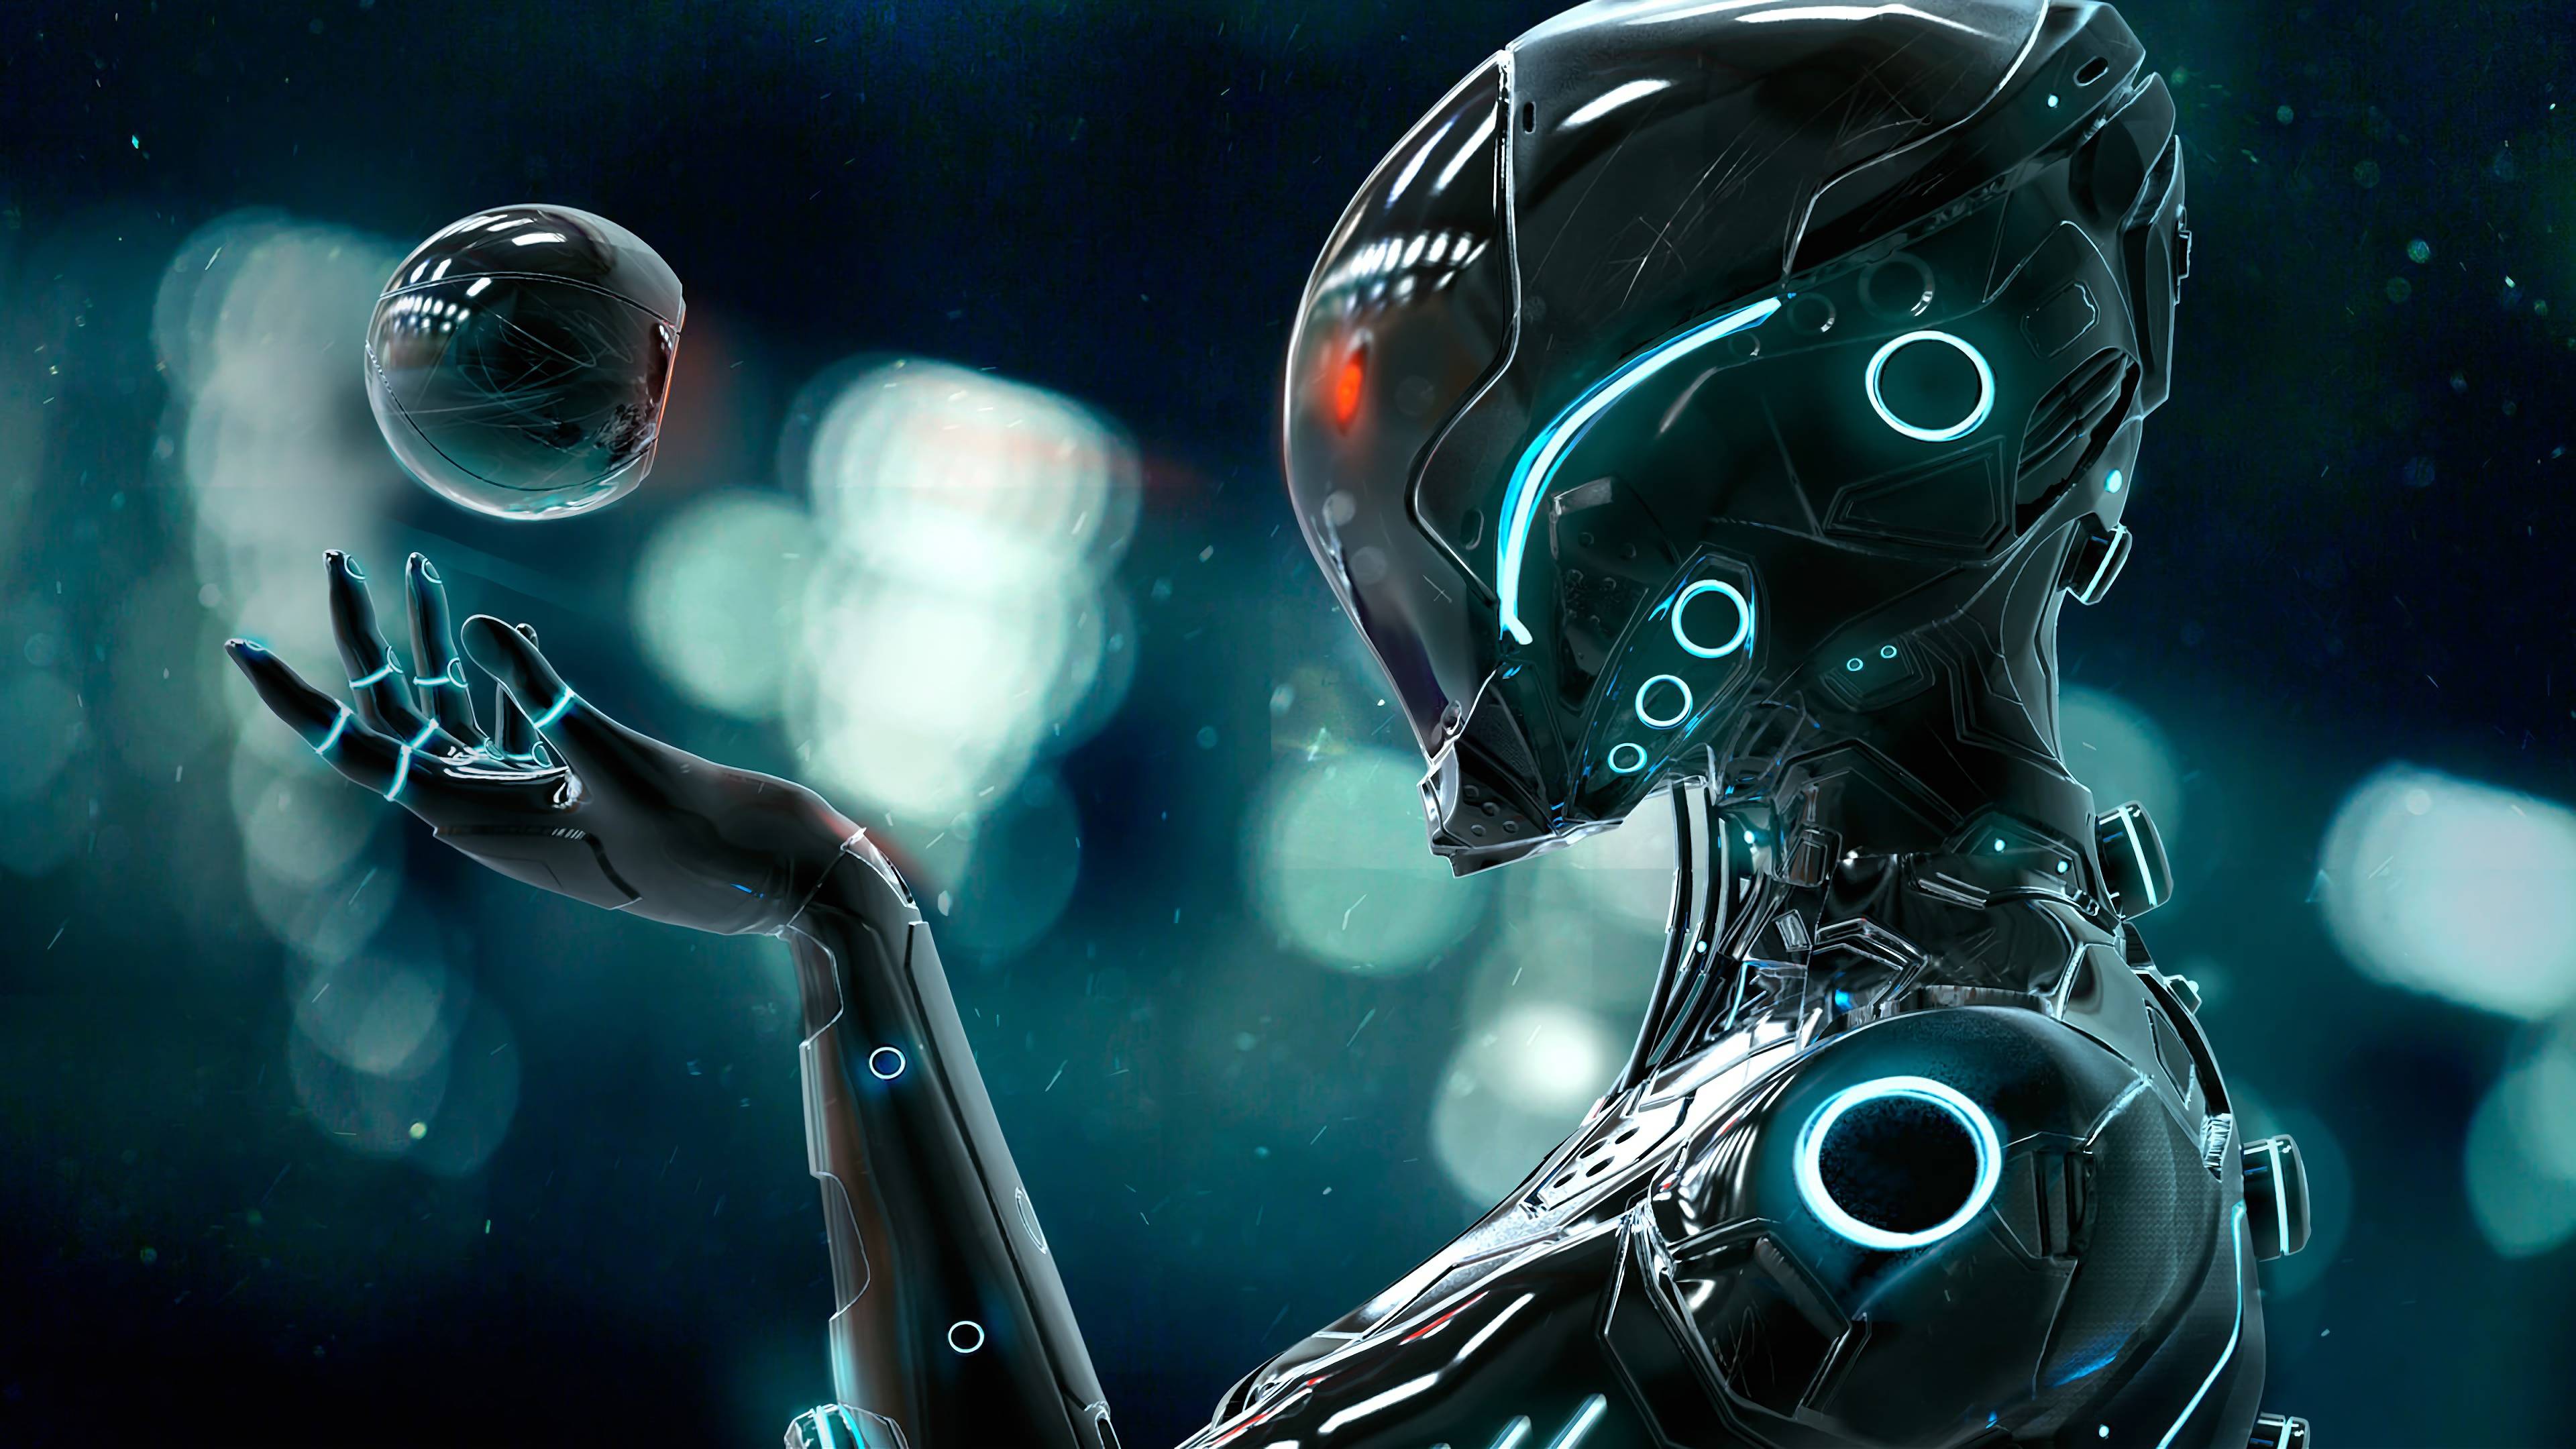 20 Choices 4k desktop wallpaper robot You Can Download It For Free ...